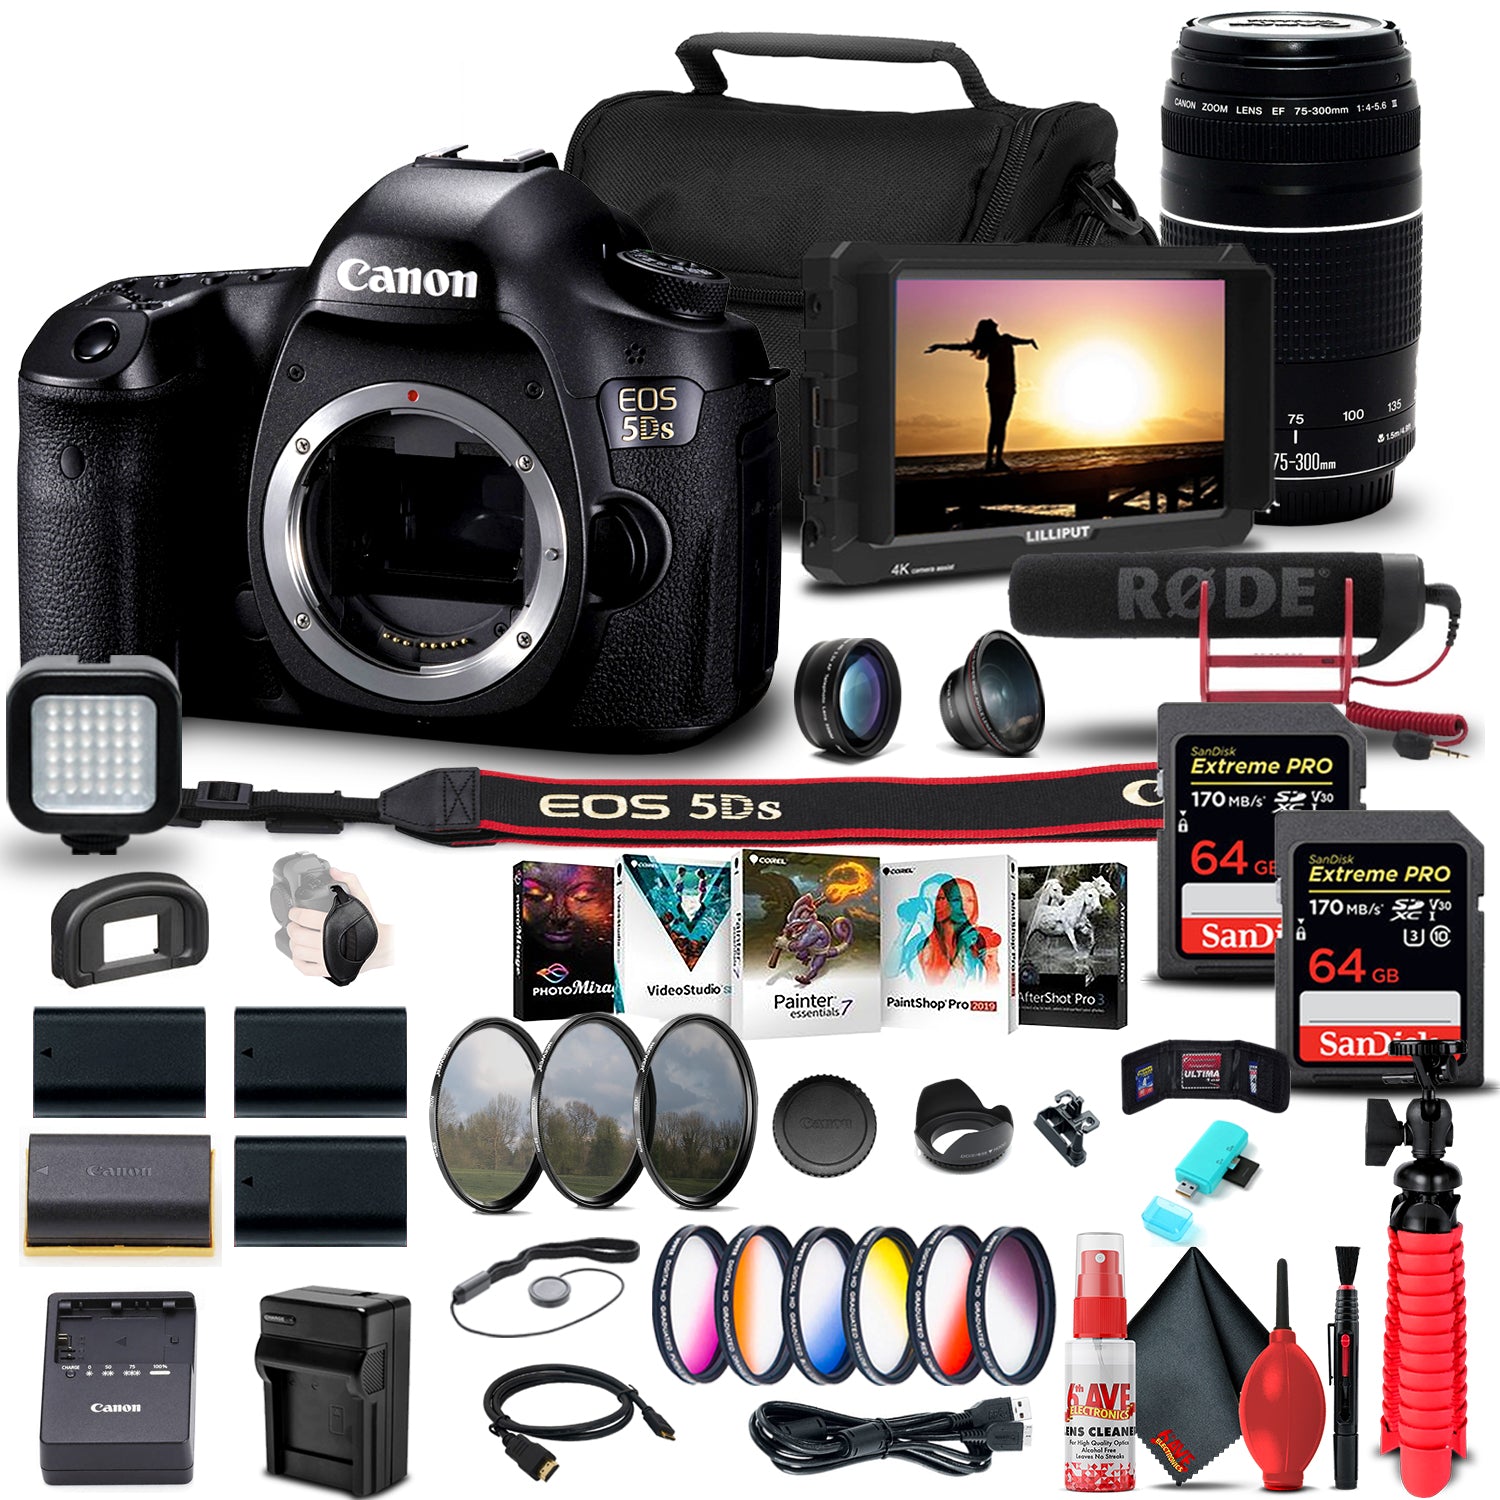 Canon EOS 5DS DSLR Camera (Body Only) (0581C002) + Canon Lens Ultimate Bundle